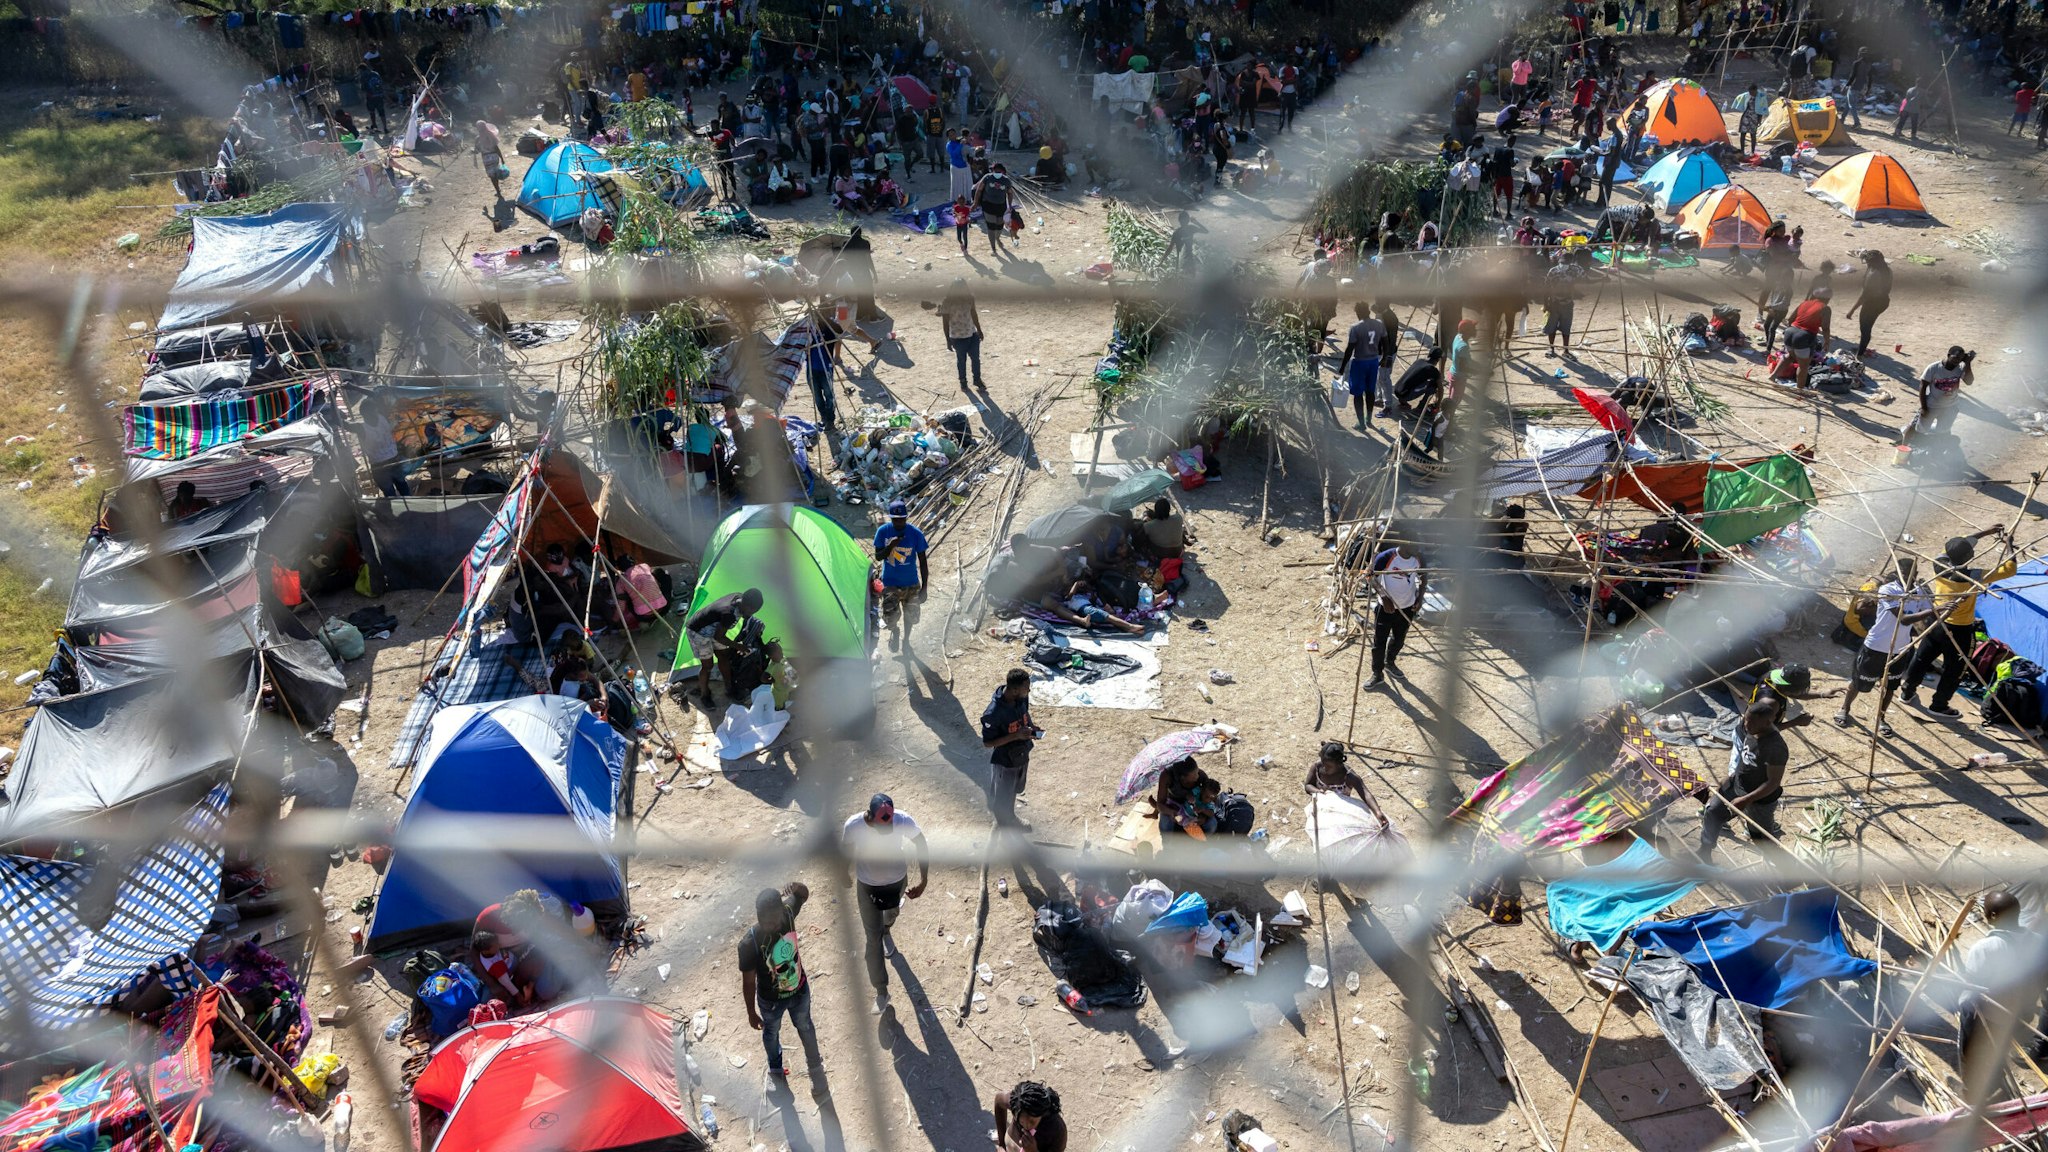 DEL RIO, TX - SEPTEMBER 17: Thousands of migrants, mostly from Haiti, gather at a makeshift encampment under the International Bridge between Del Rio, TX and Acuña, MX on September 17, 2021 in Del Rio, Texas. The makeshift encampment has grown rapidly and officials are struggling to provide food, water, shelter, and sanitation, forcing between 8,000 and 12,000 migrants to walk across the Rio Grande several times each day for basic necessities.